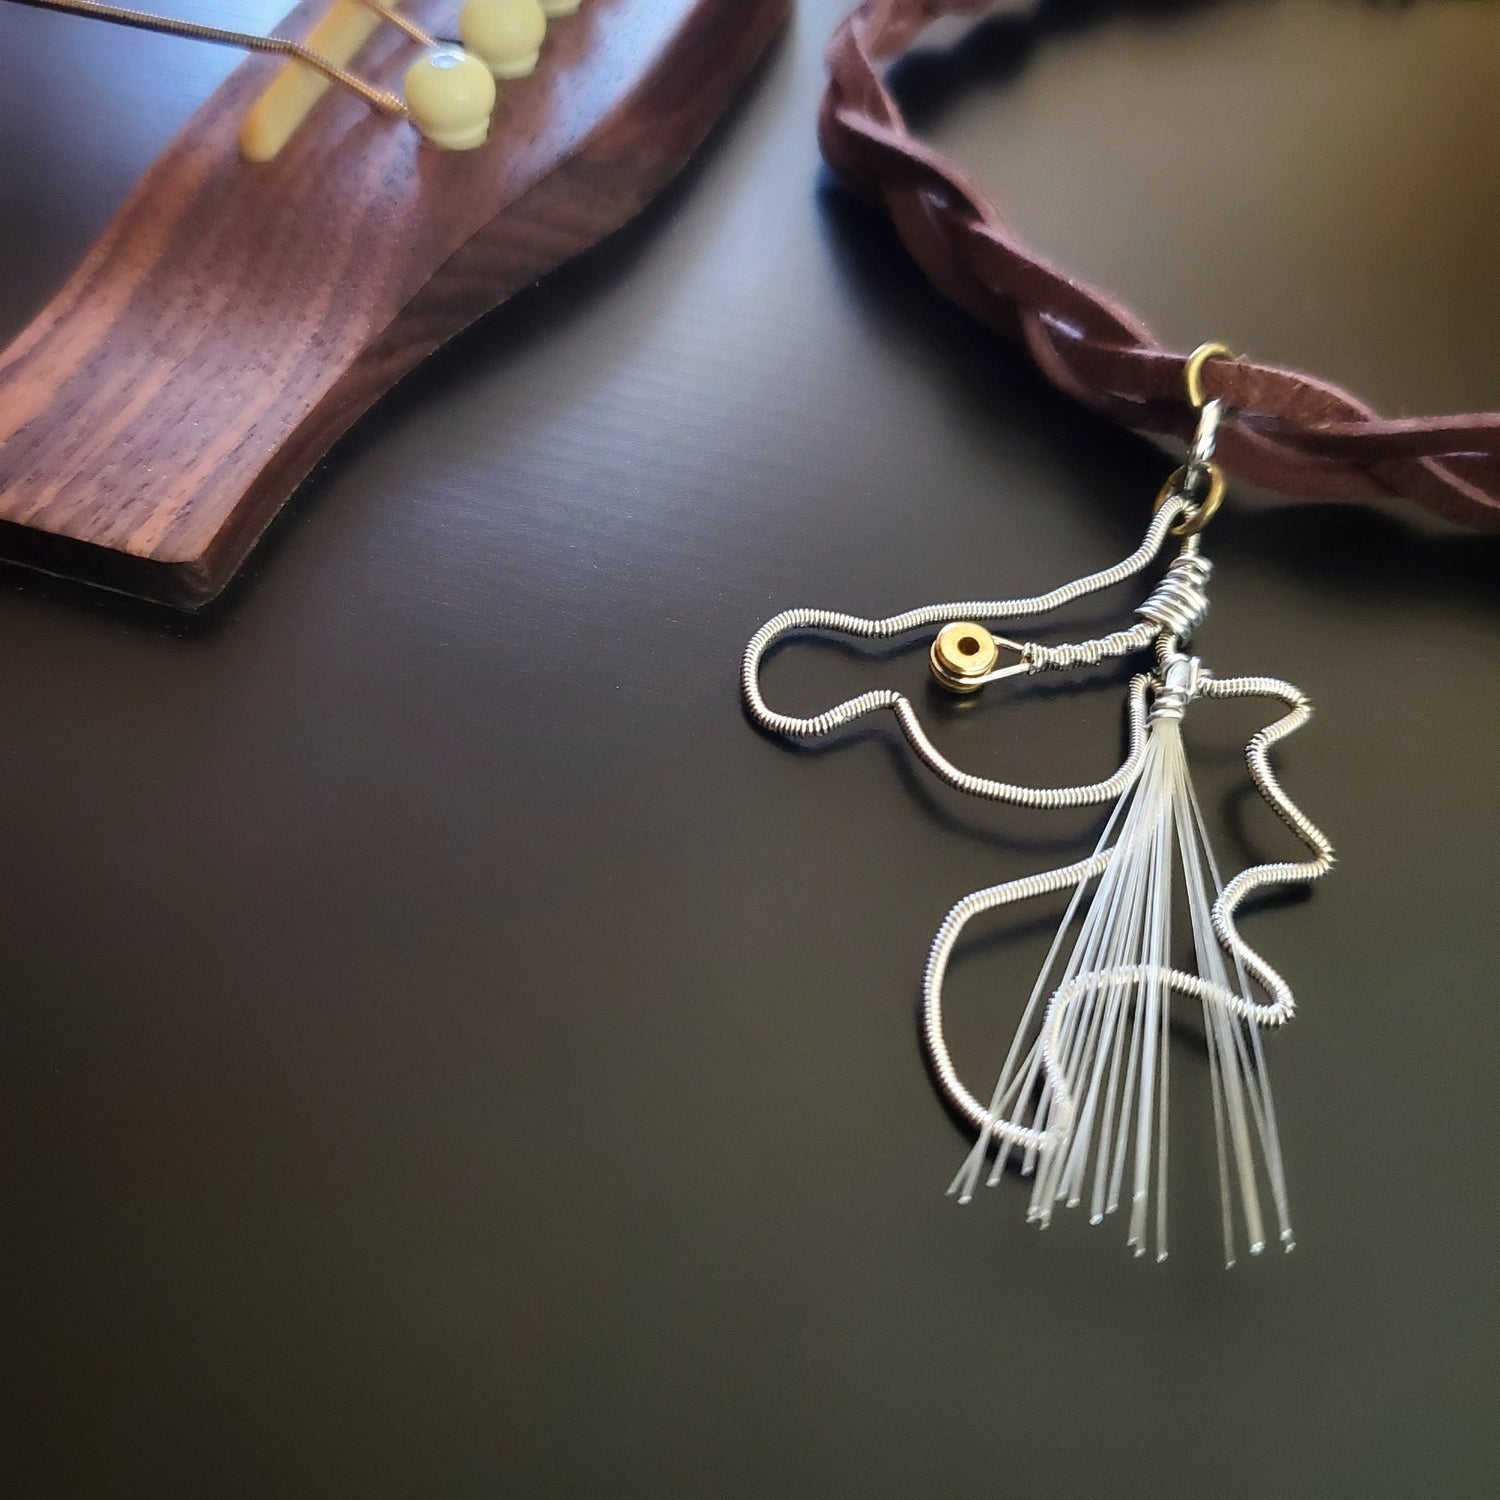 pendant made from an upcycled guitar string and genuine horse hair from a violin bow hangs from a braided suede necklace - the necklace is lying on a black guitar